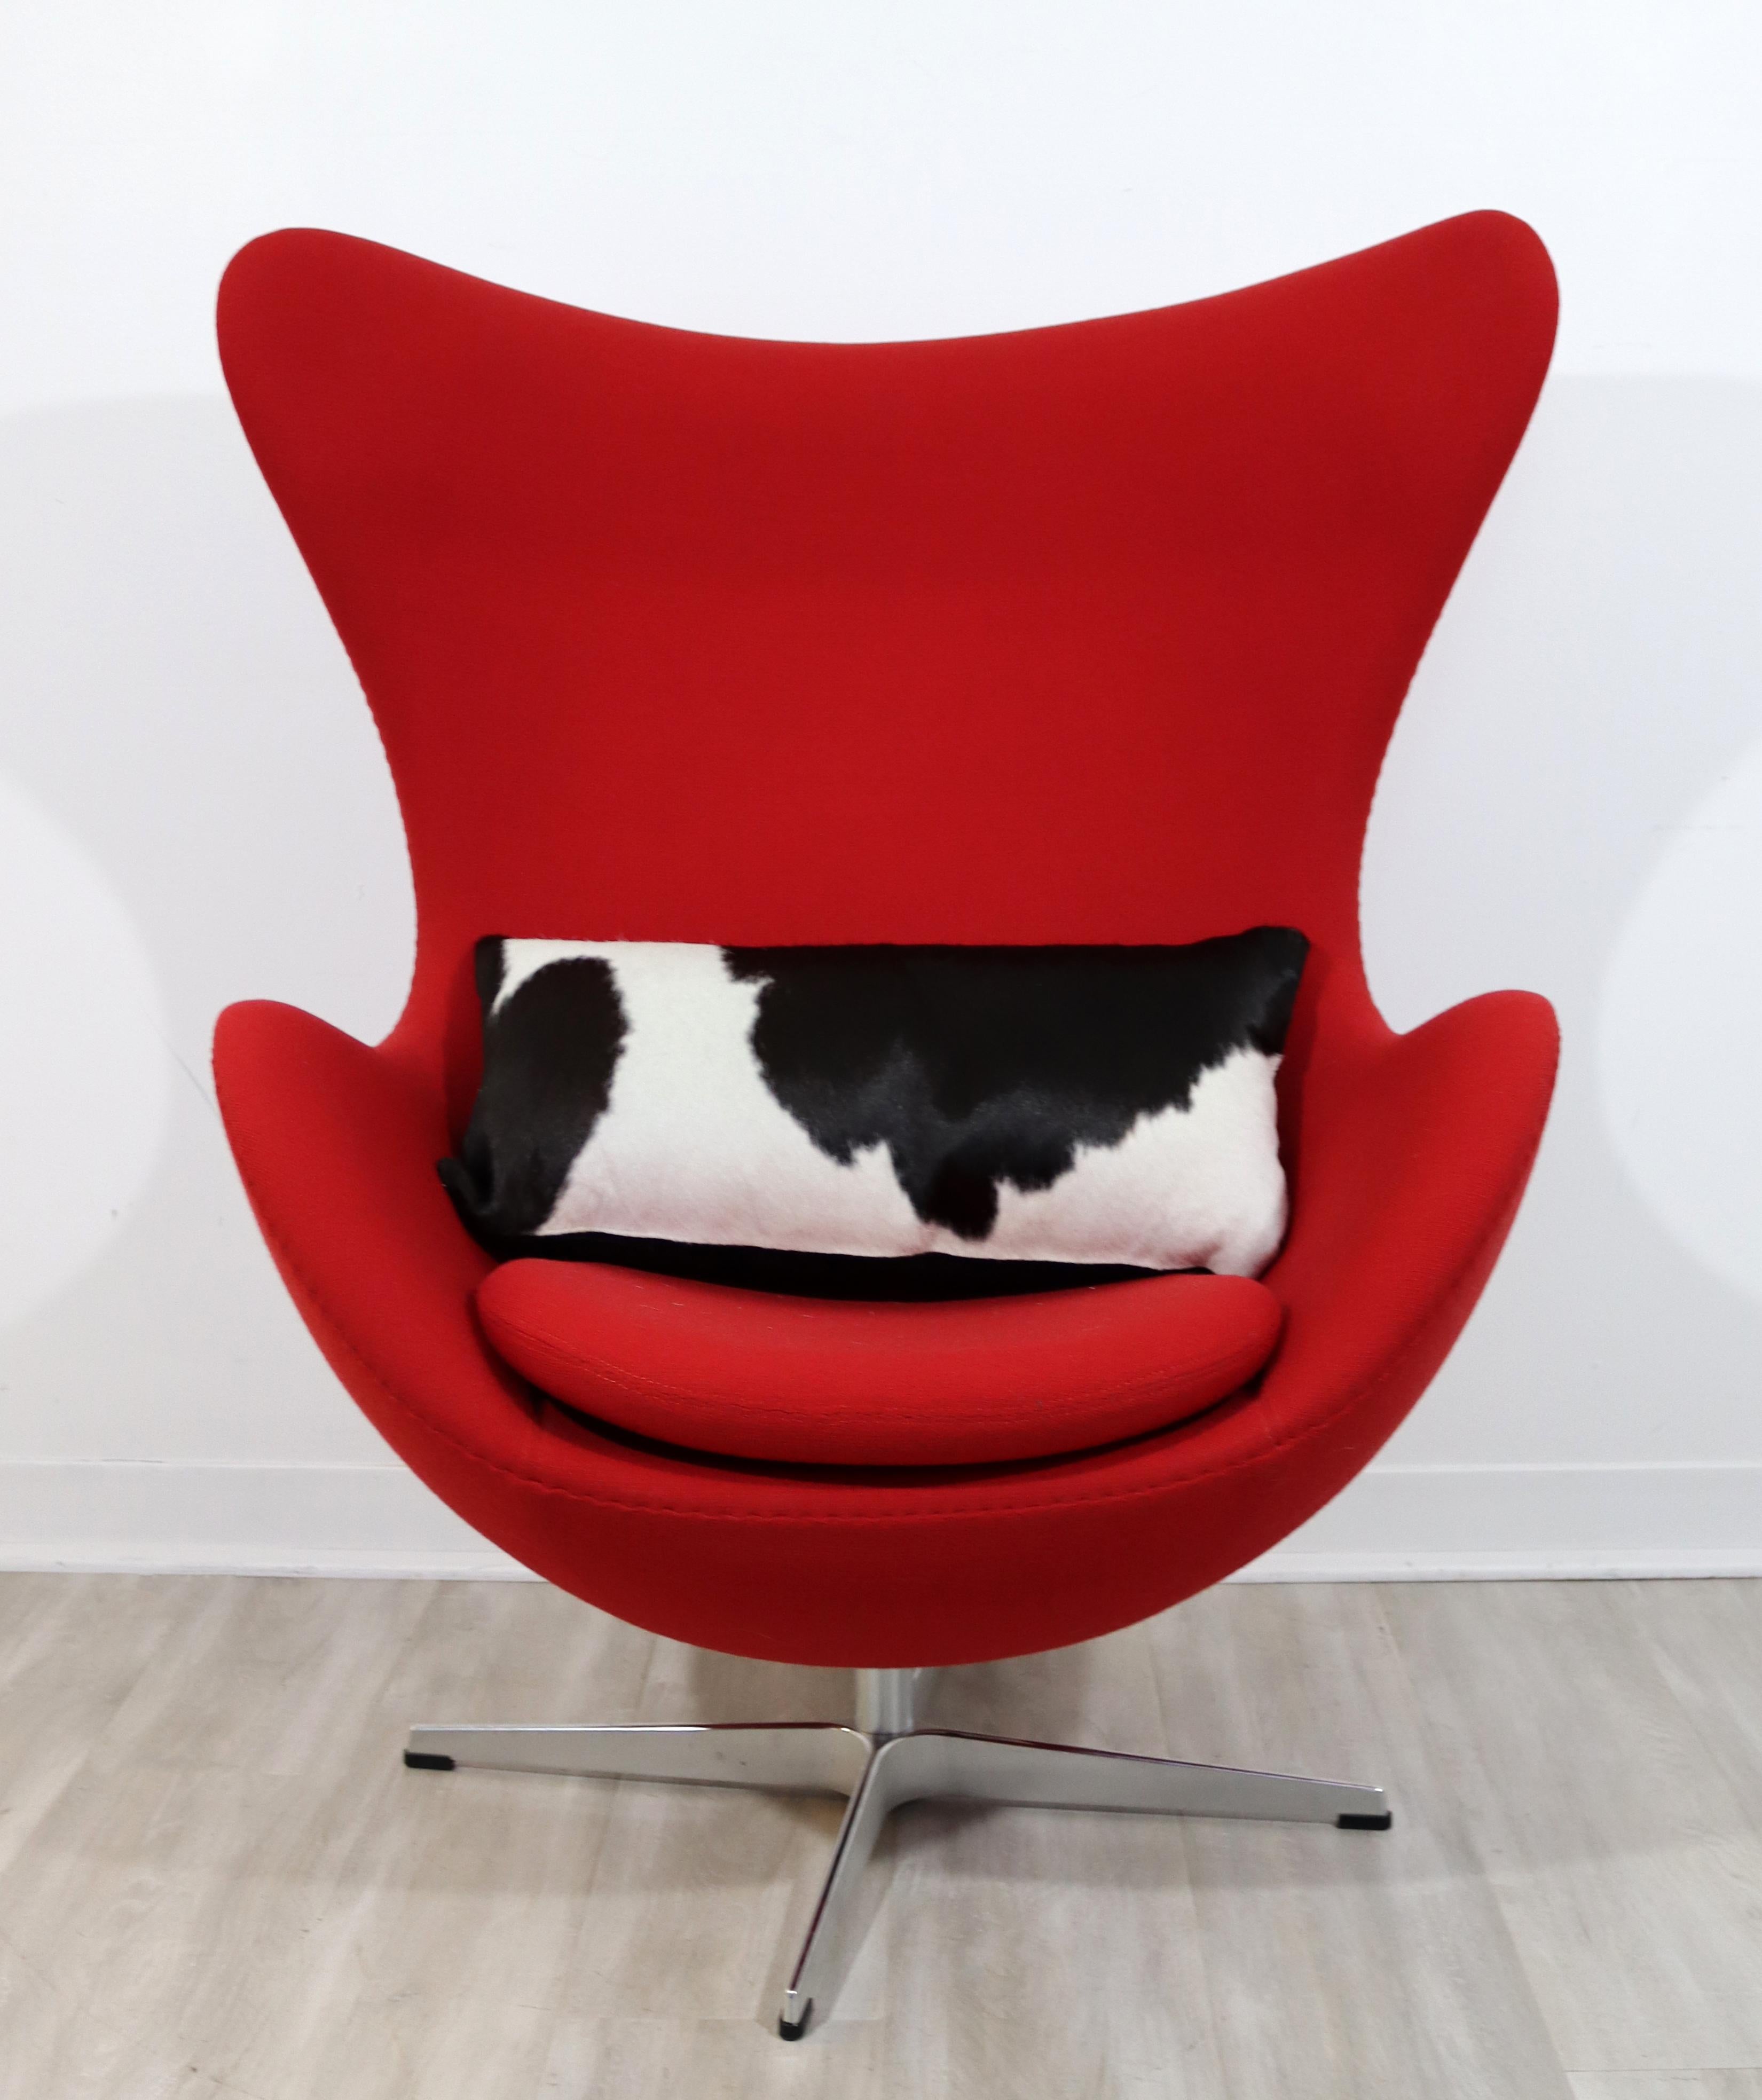 For your consideration is an excellent, high back Egg chair, in a red upholstery, designed by Arne Jacobsen for Fritz Hansen, reproduced in 2017 by DWR. In excellent condition. Dimensions: 34